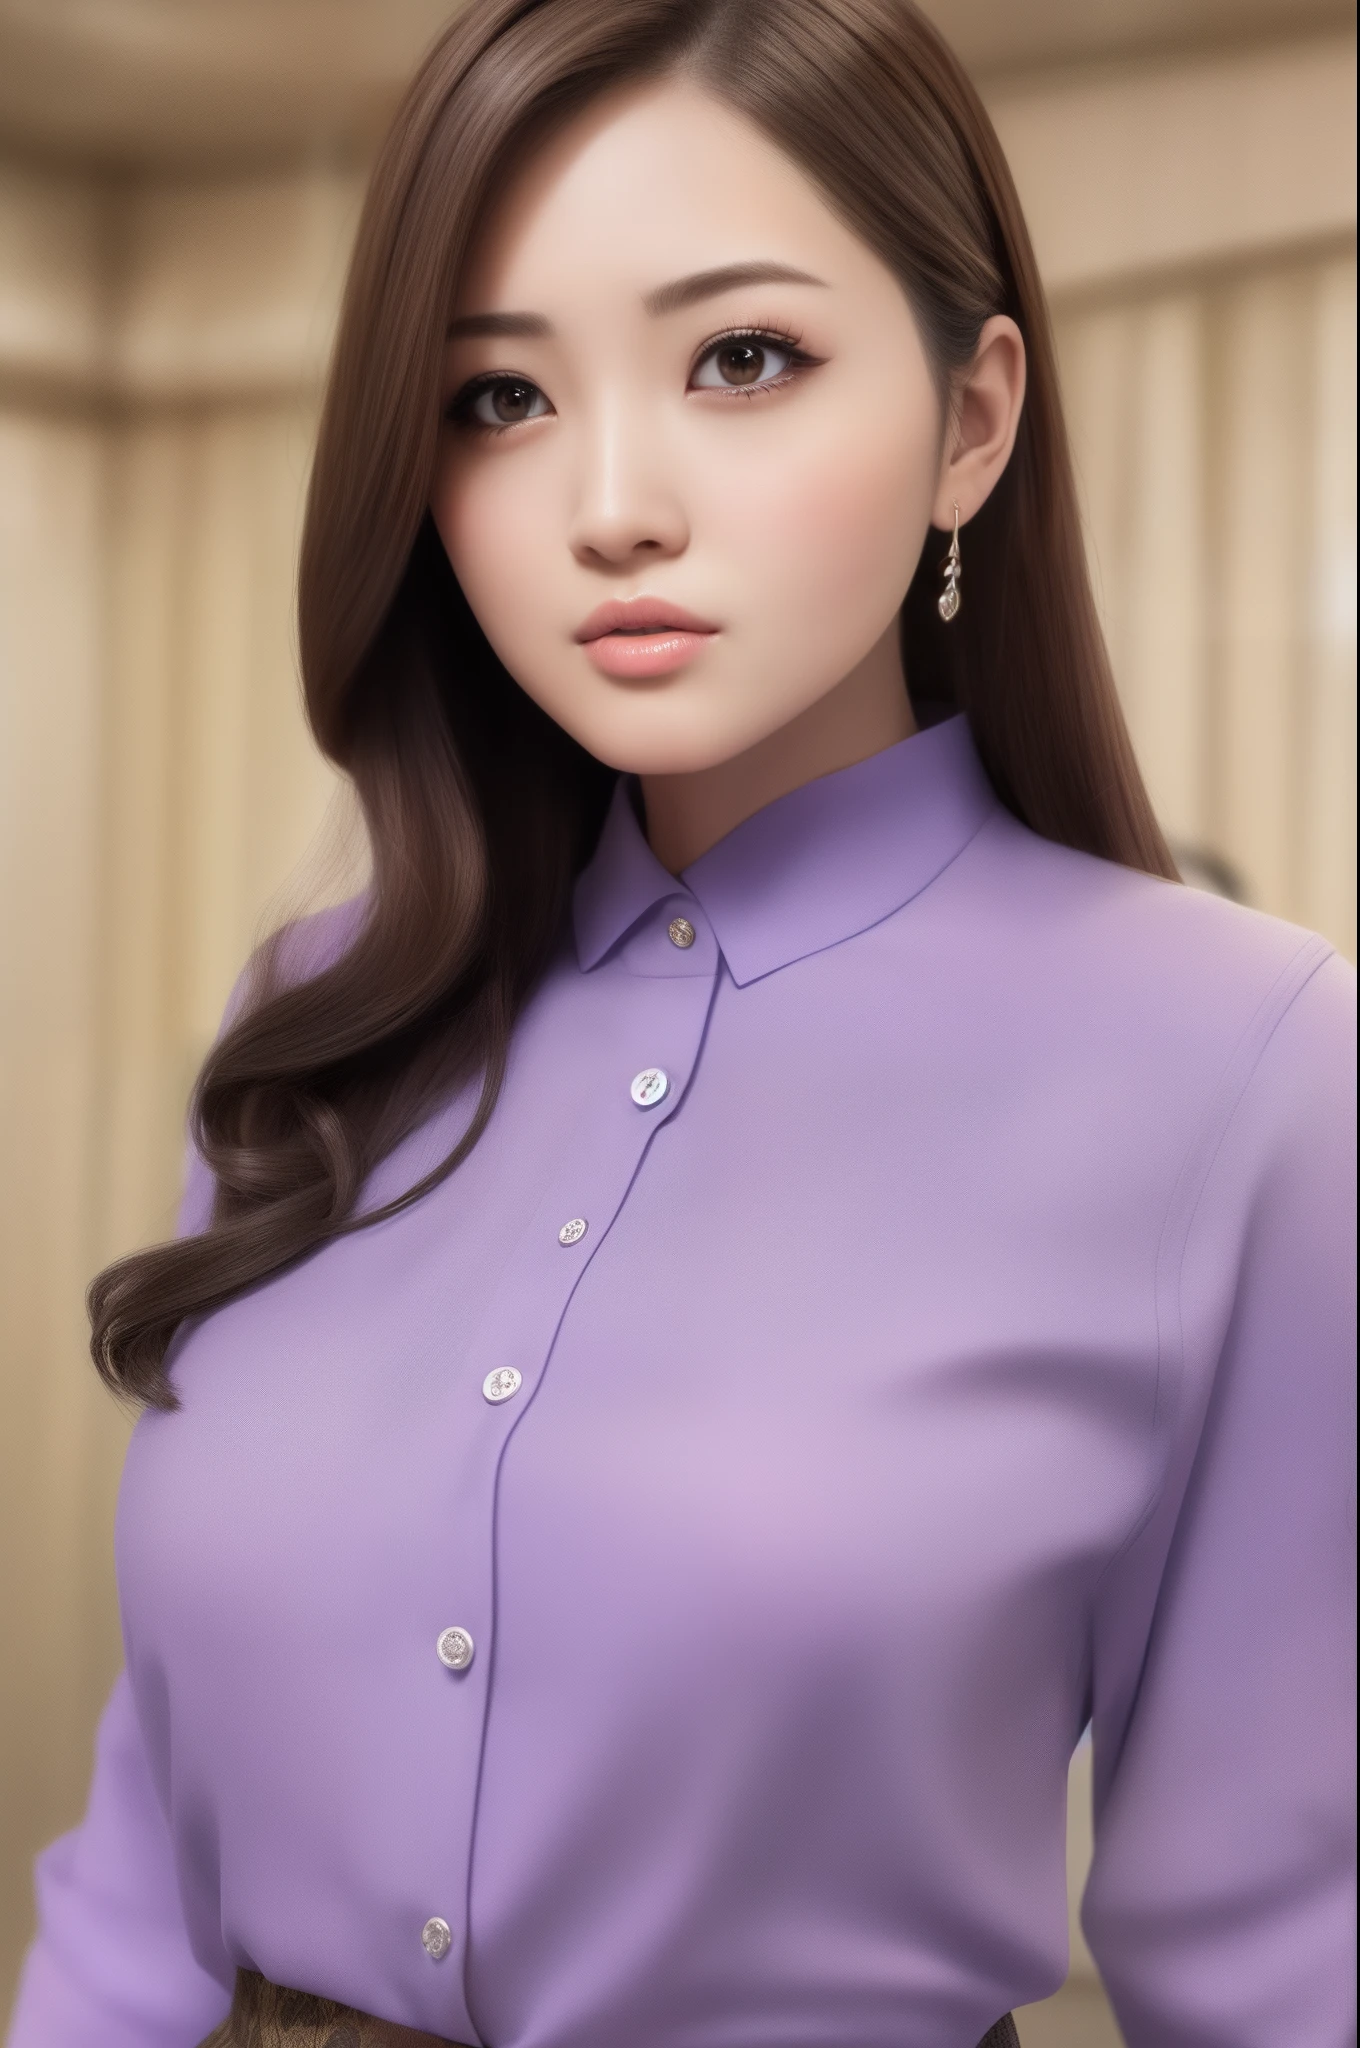 Beautuful Women、A hyper-realistic、hyperdetailed face、Detailed lips、Full lips、A detailed eye、slick skin、Button shirt、tight skirts、jaket